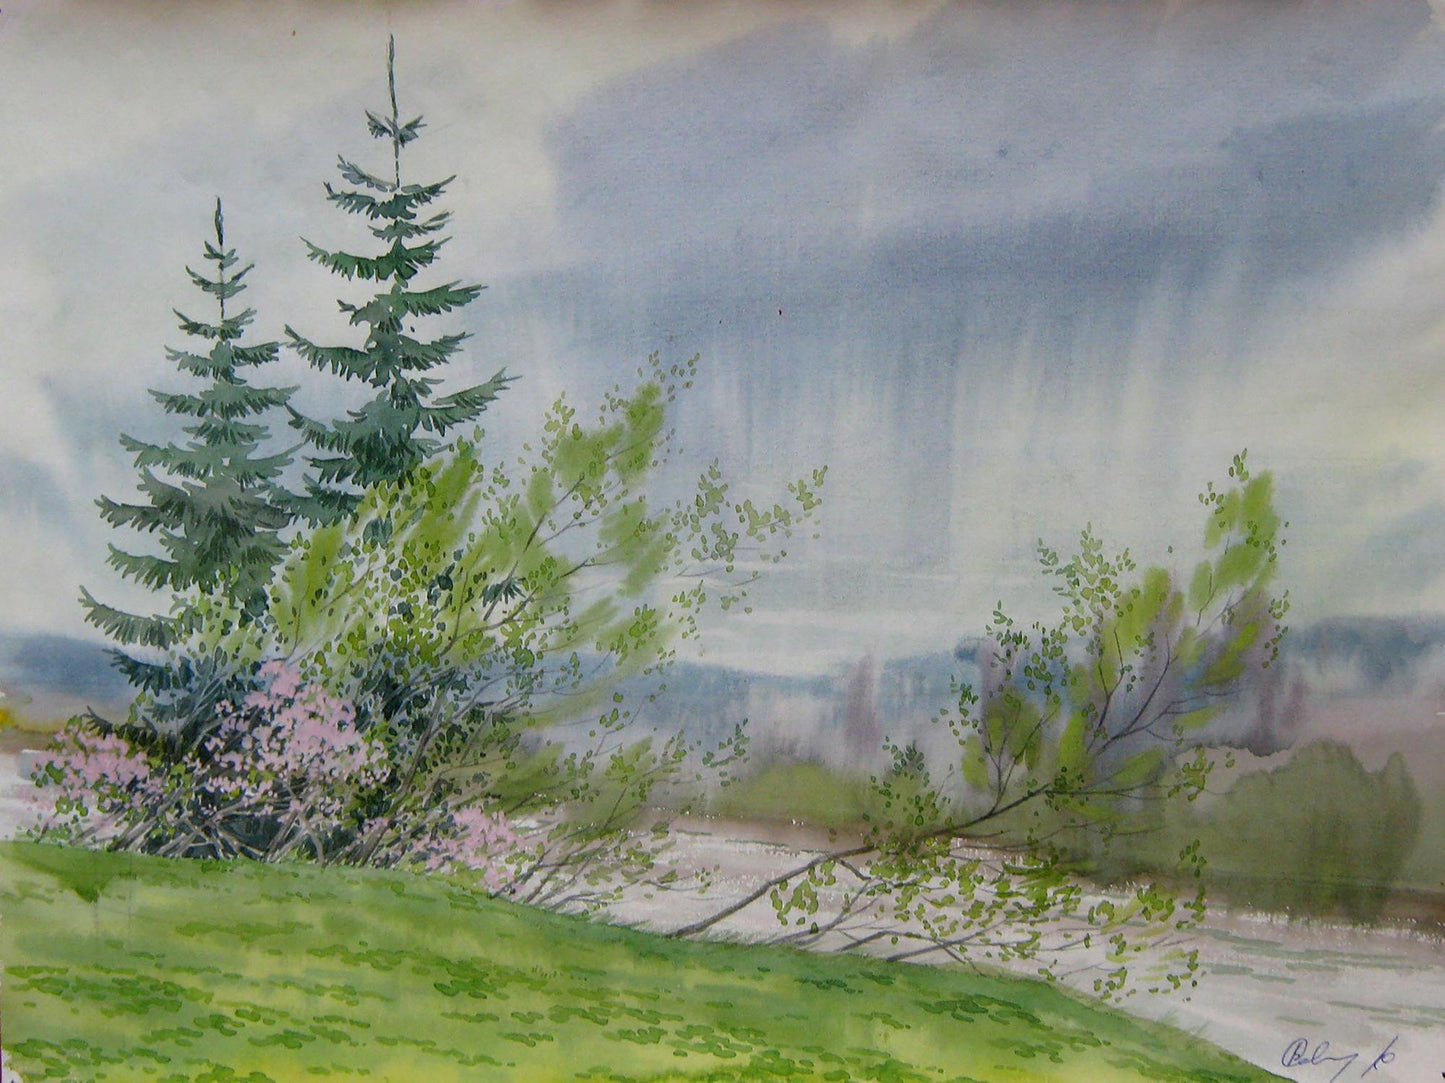 Gloomy Day by Valery Savenets, a watercolor painting capturing somber atmospheric tones.